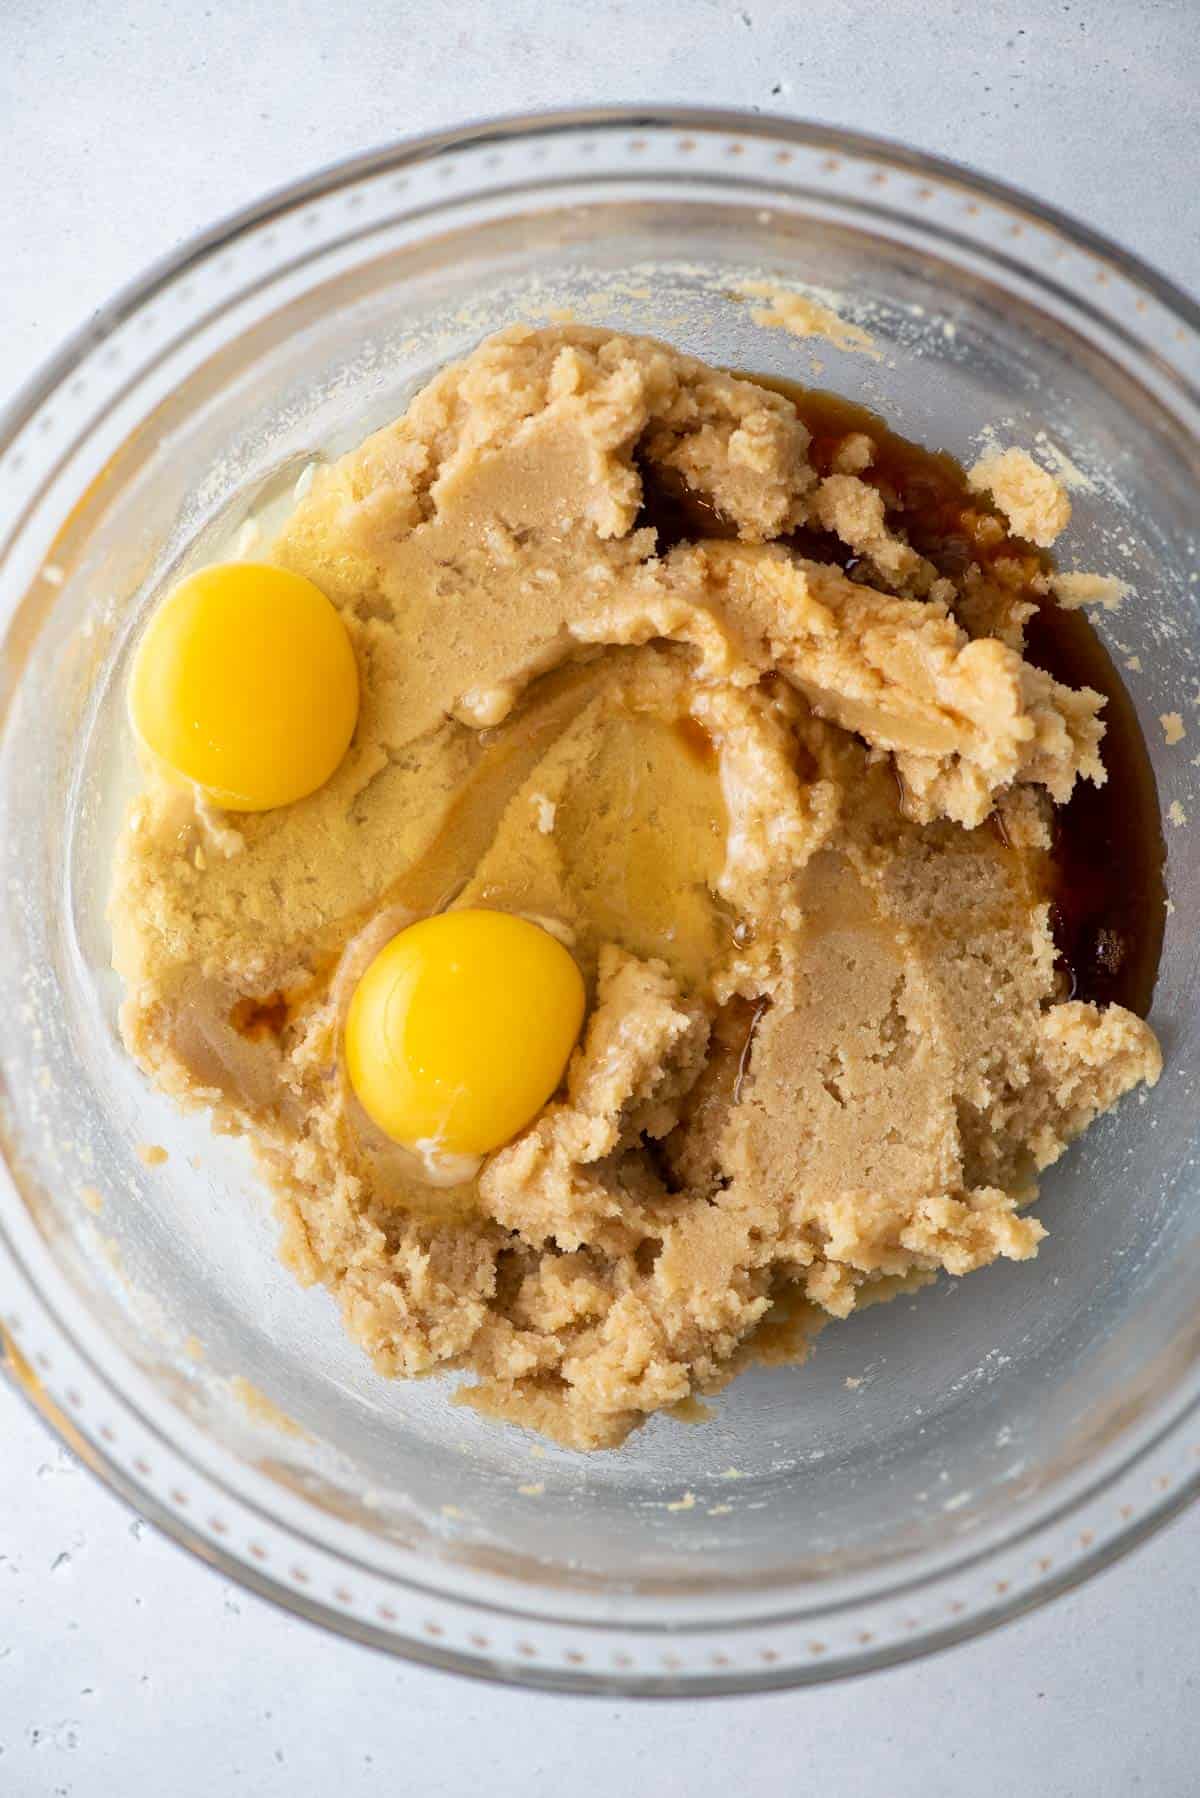 Eggs added to cookie dough